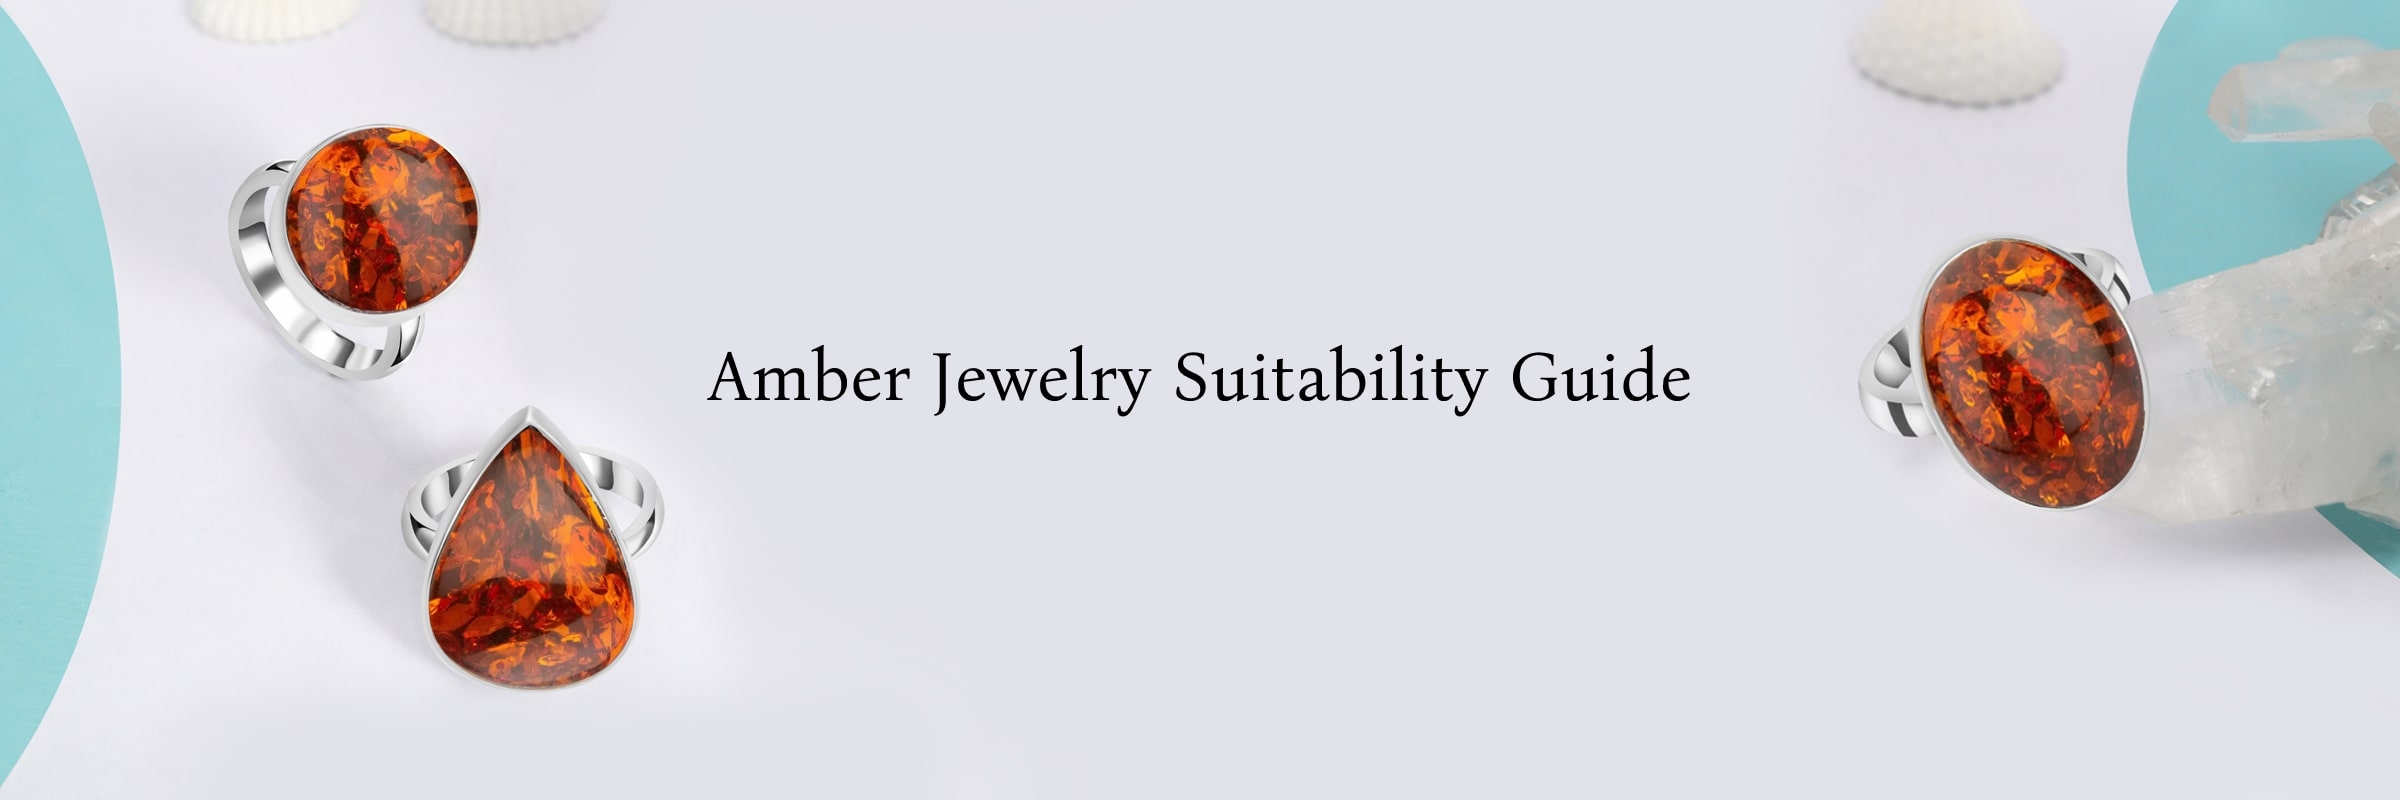 Who Should Wear The Amber Jewelry